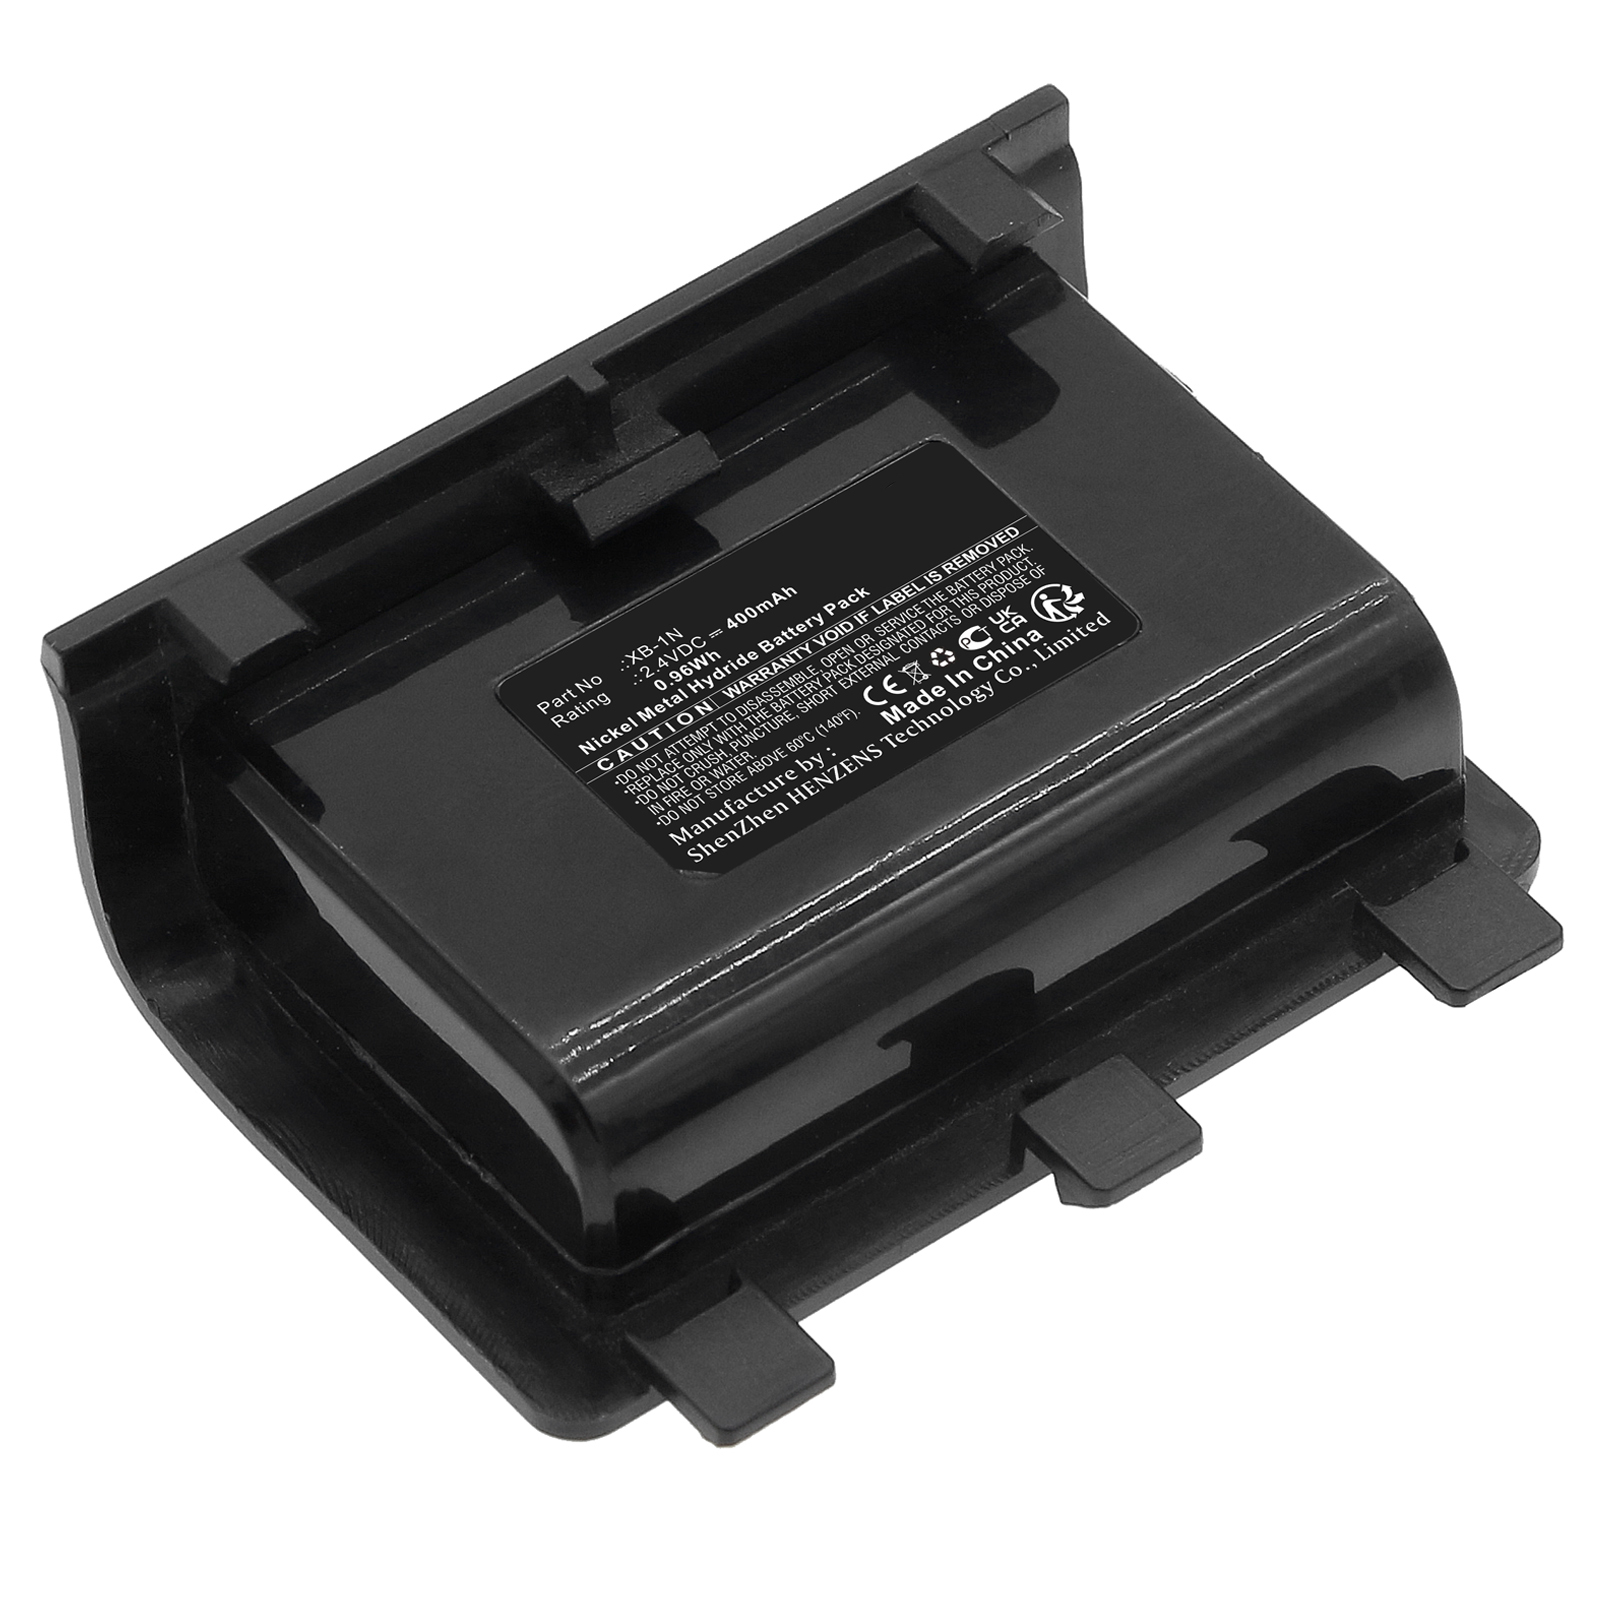 Synergy Digital Game Console Battery, Compatible with Microsoft XB-1N Game Console Battery (Ni-MH, 2.4V, 400mAh)